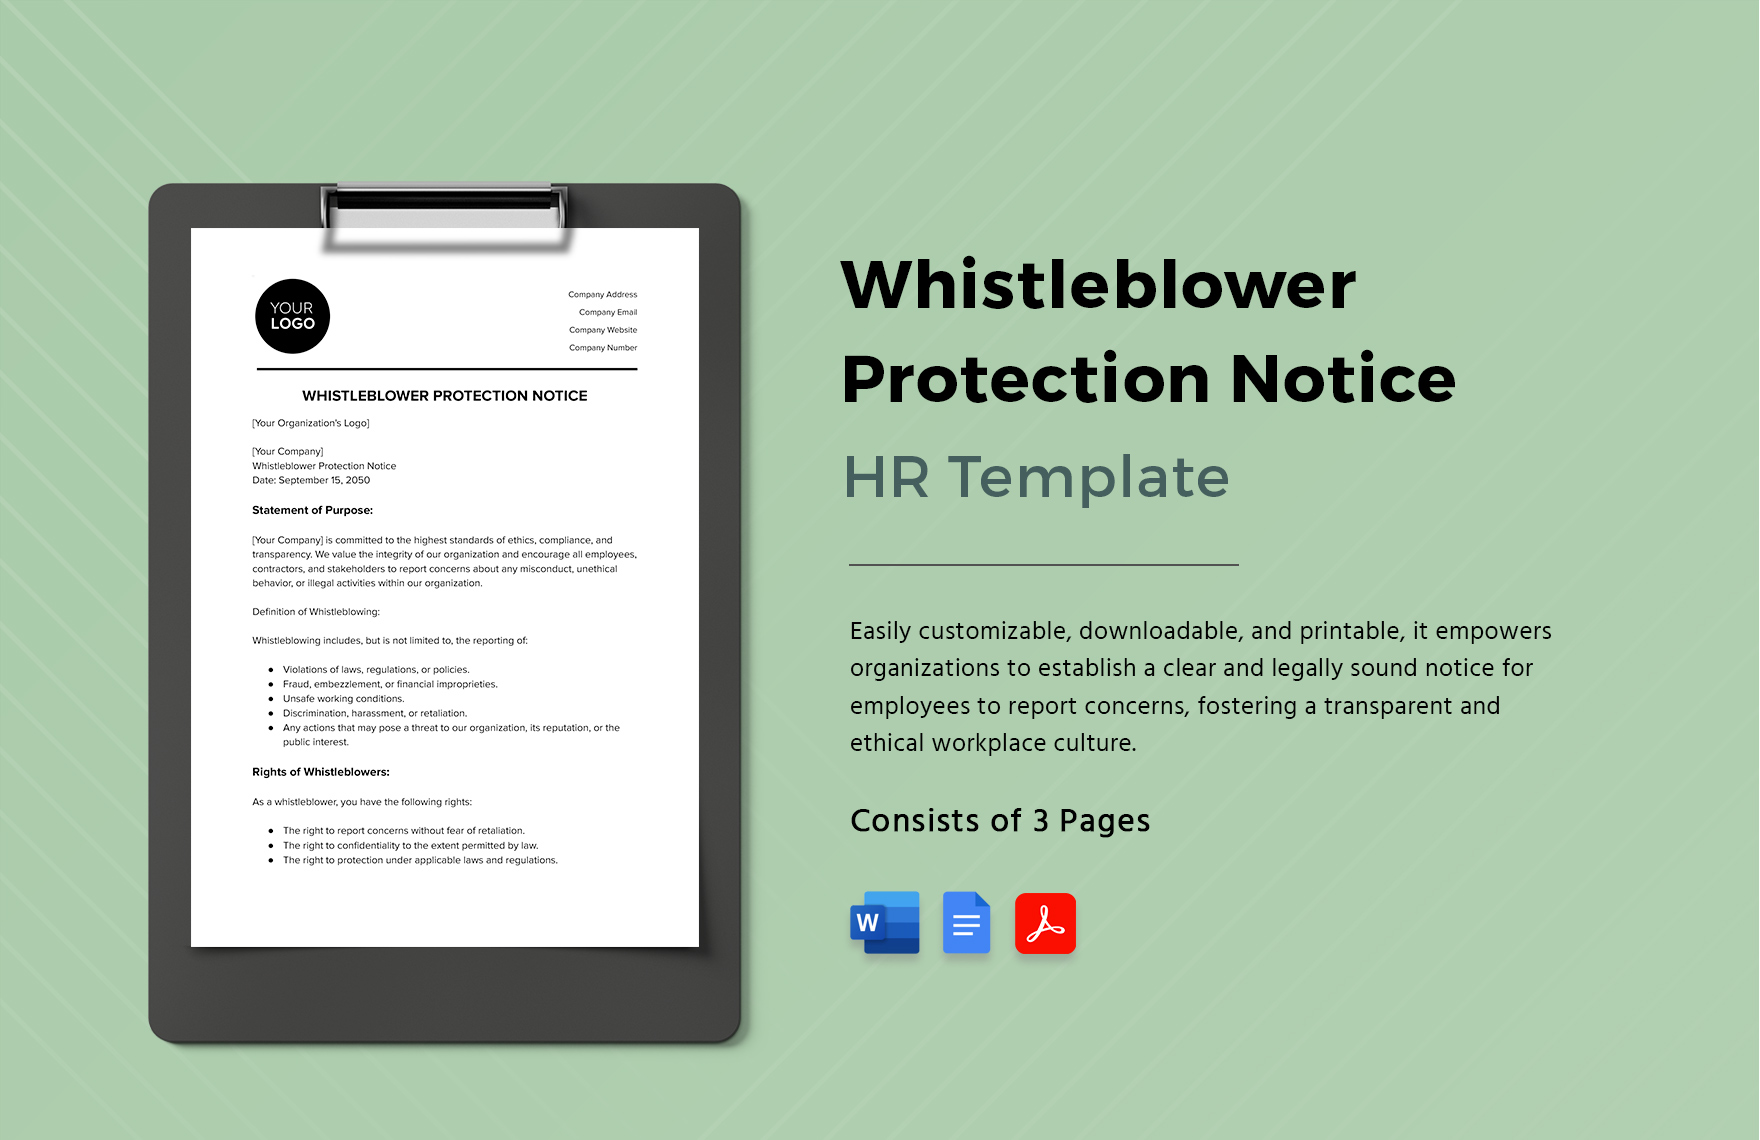 Whistleblower Protection Notice HR Template